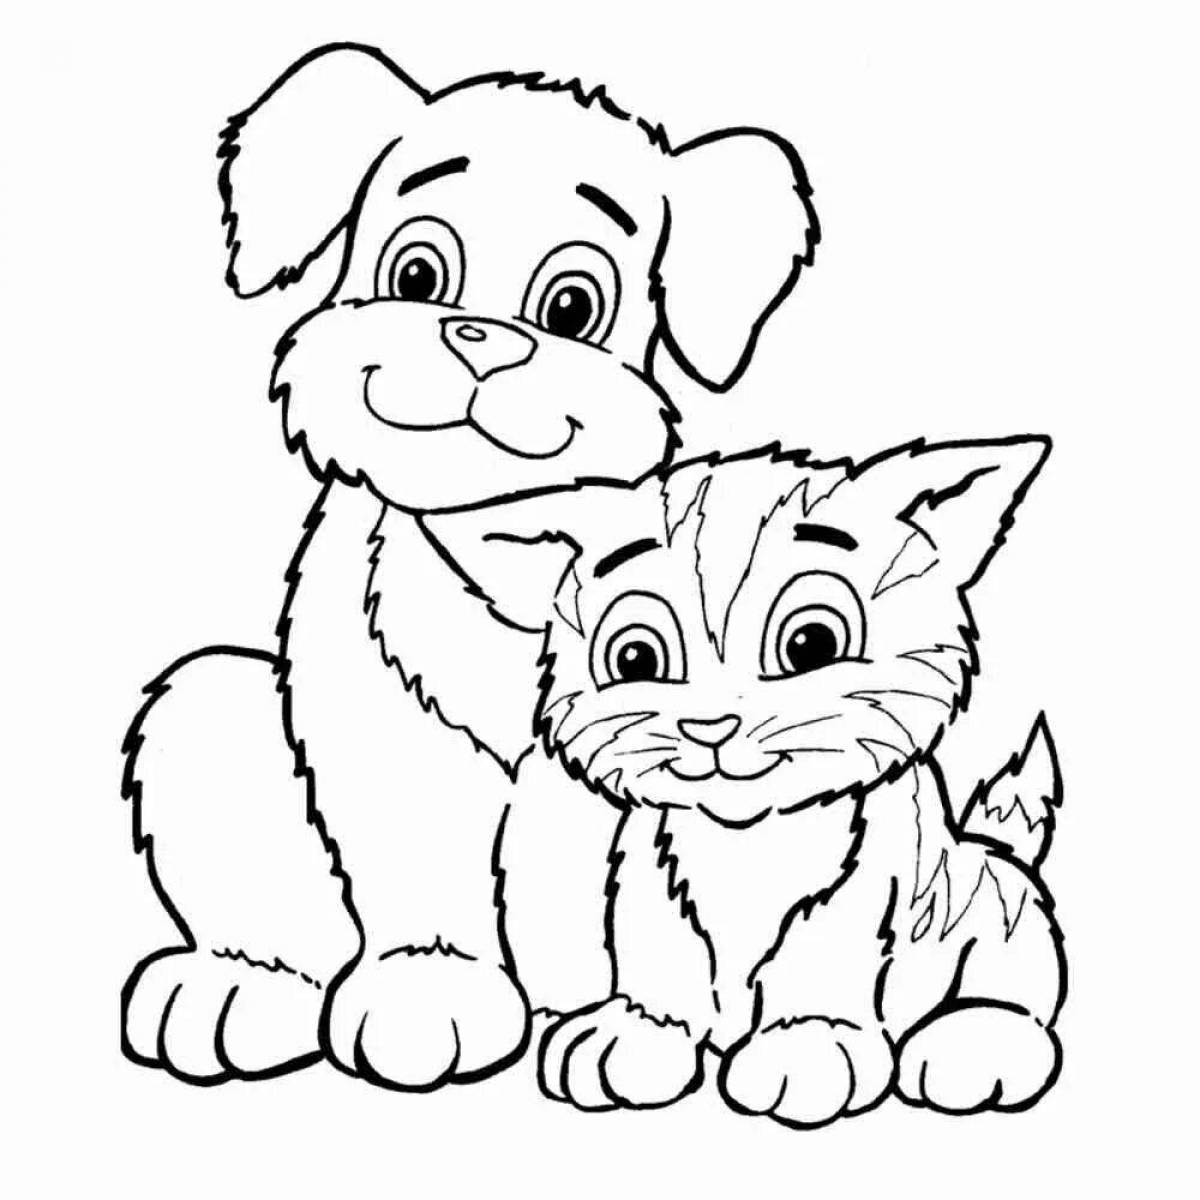 Adorable kitten and dog coloring page